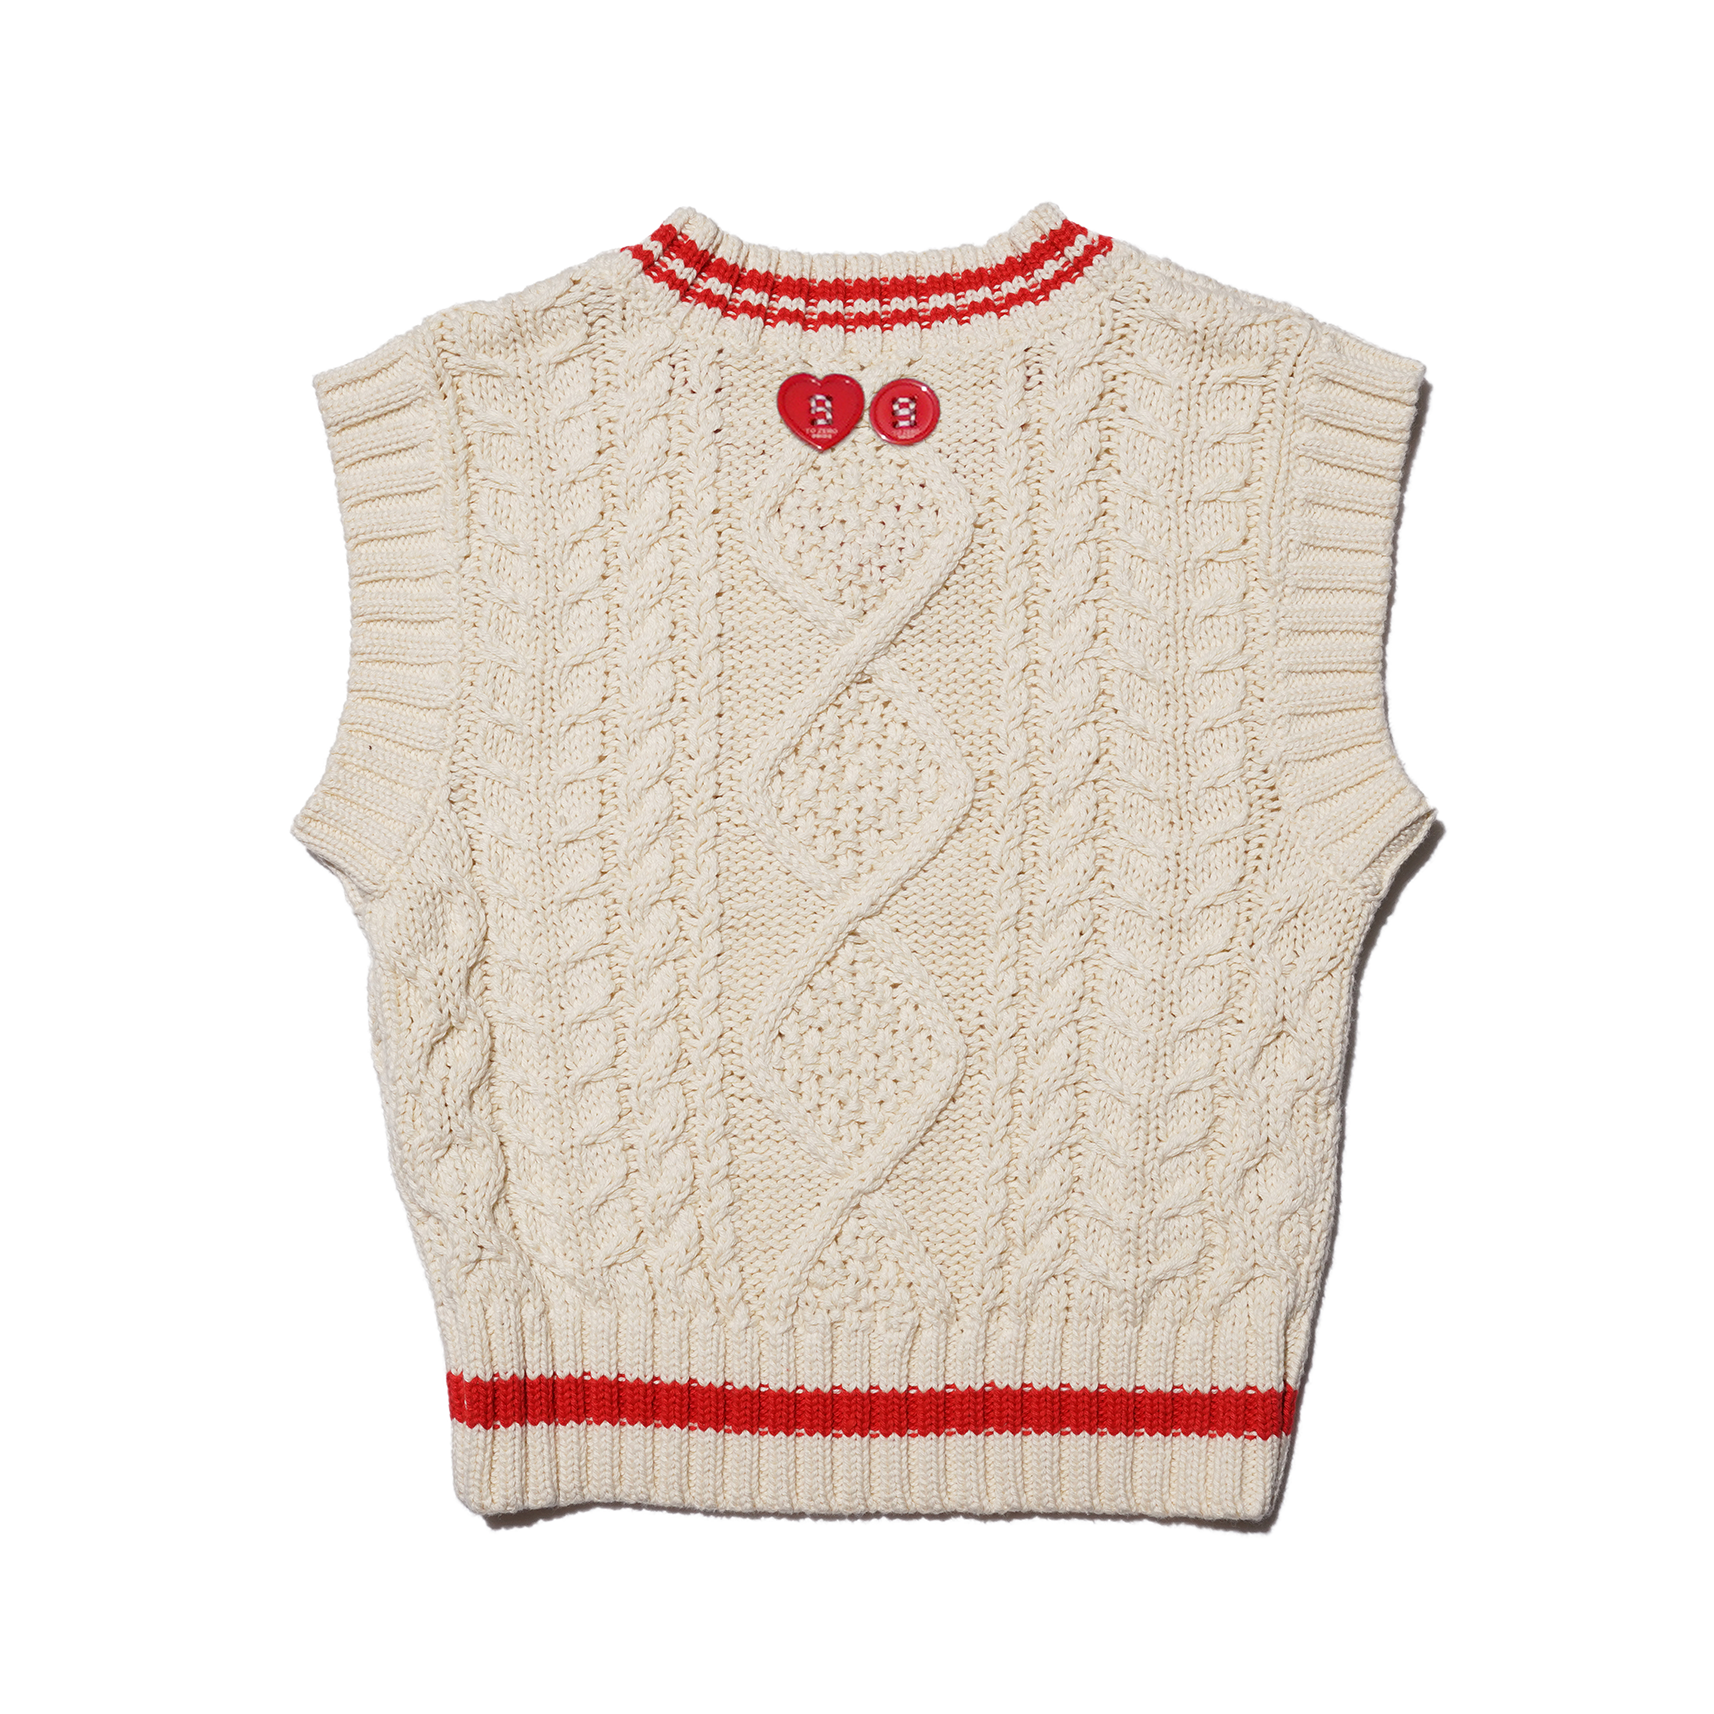 ‘TO ZERO 99/00’ Kids Printed Cable Knit Vest